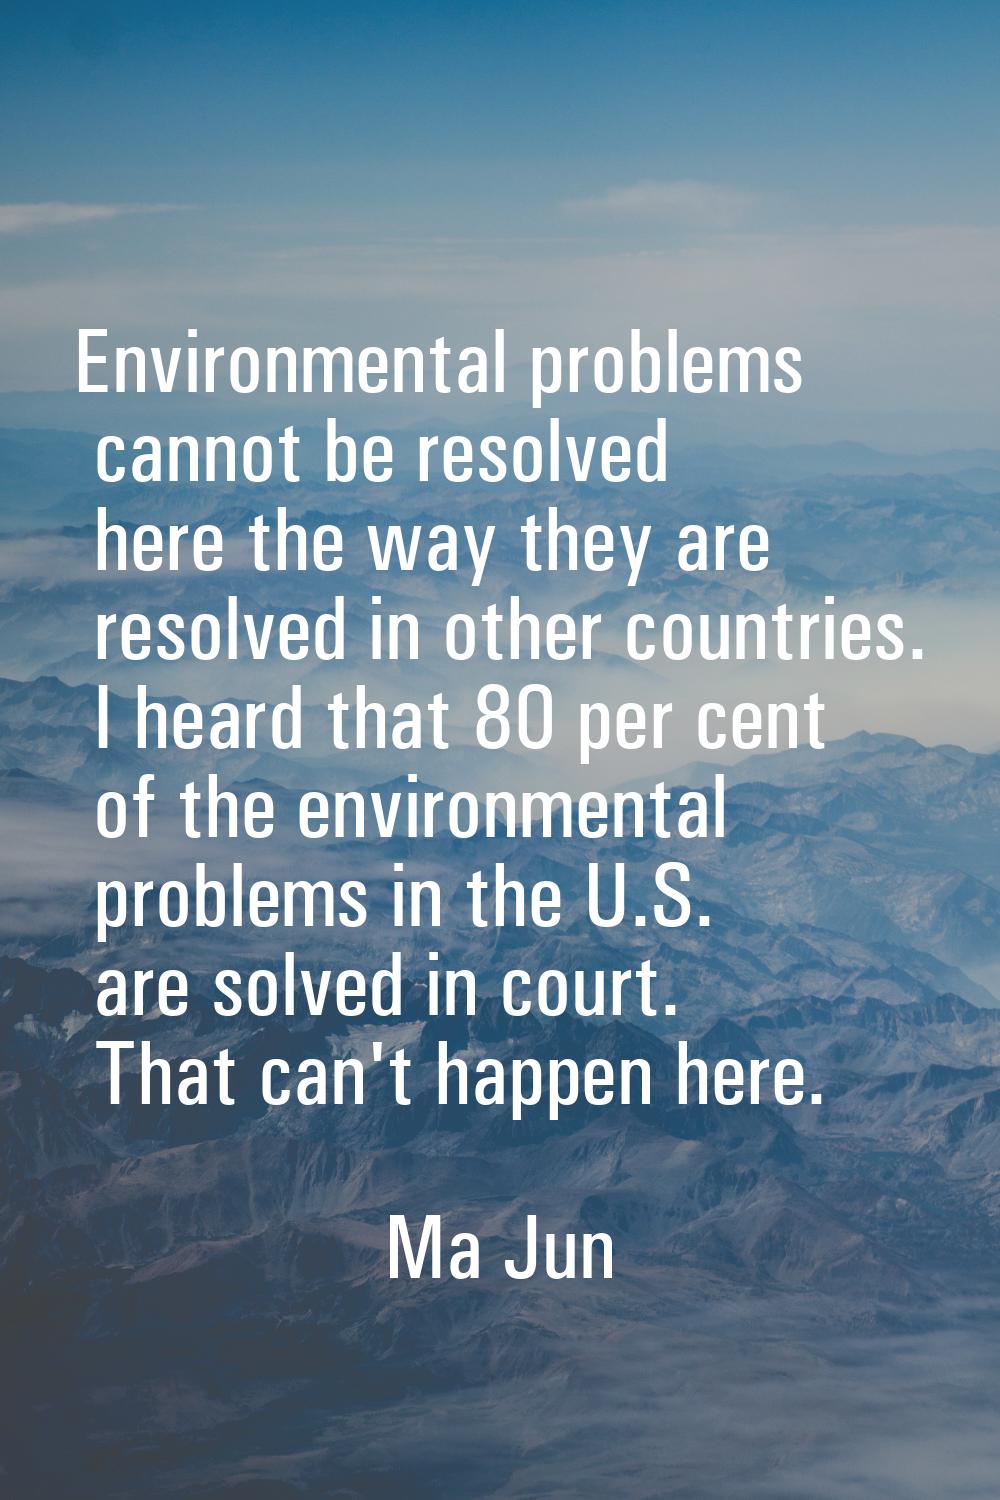 Environmental problems cannot be resolved here the way they are resolved in other countries. I hear